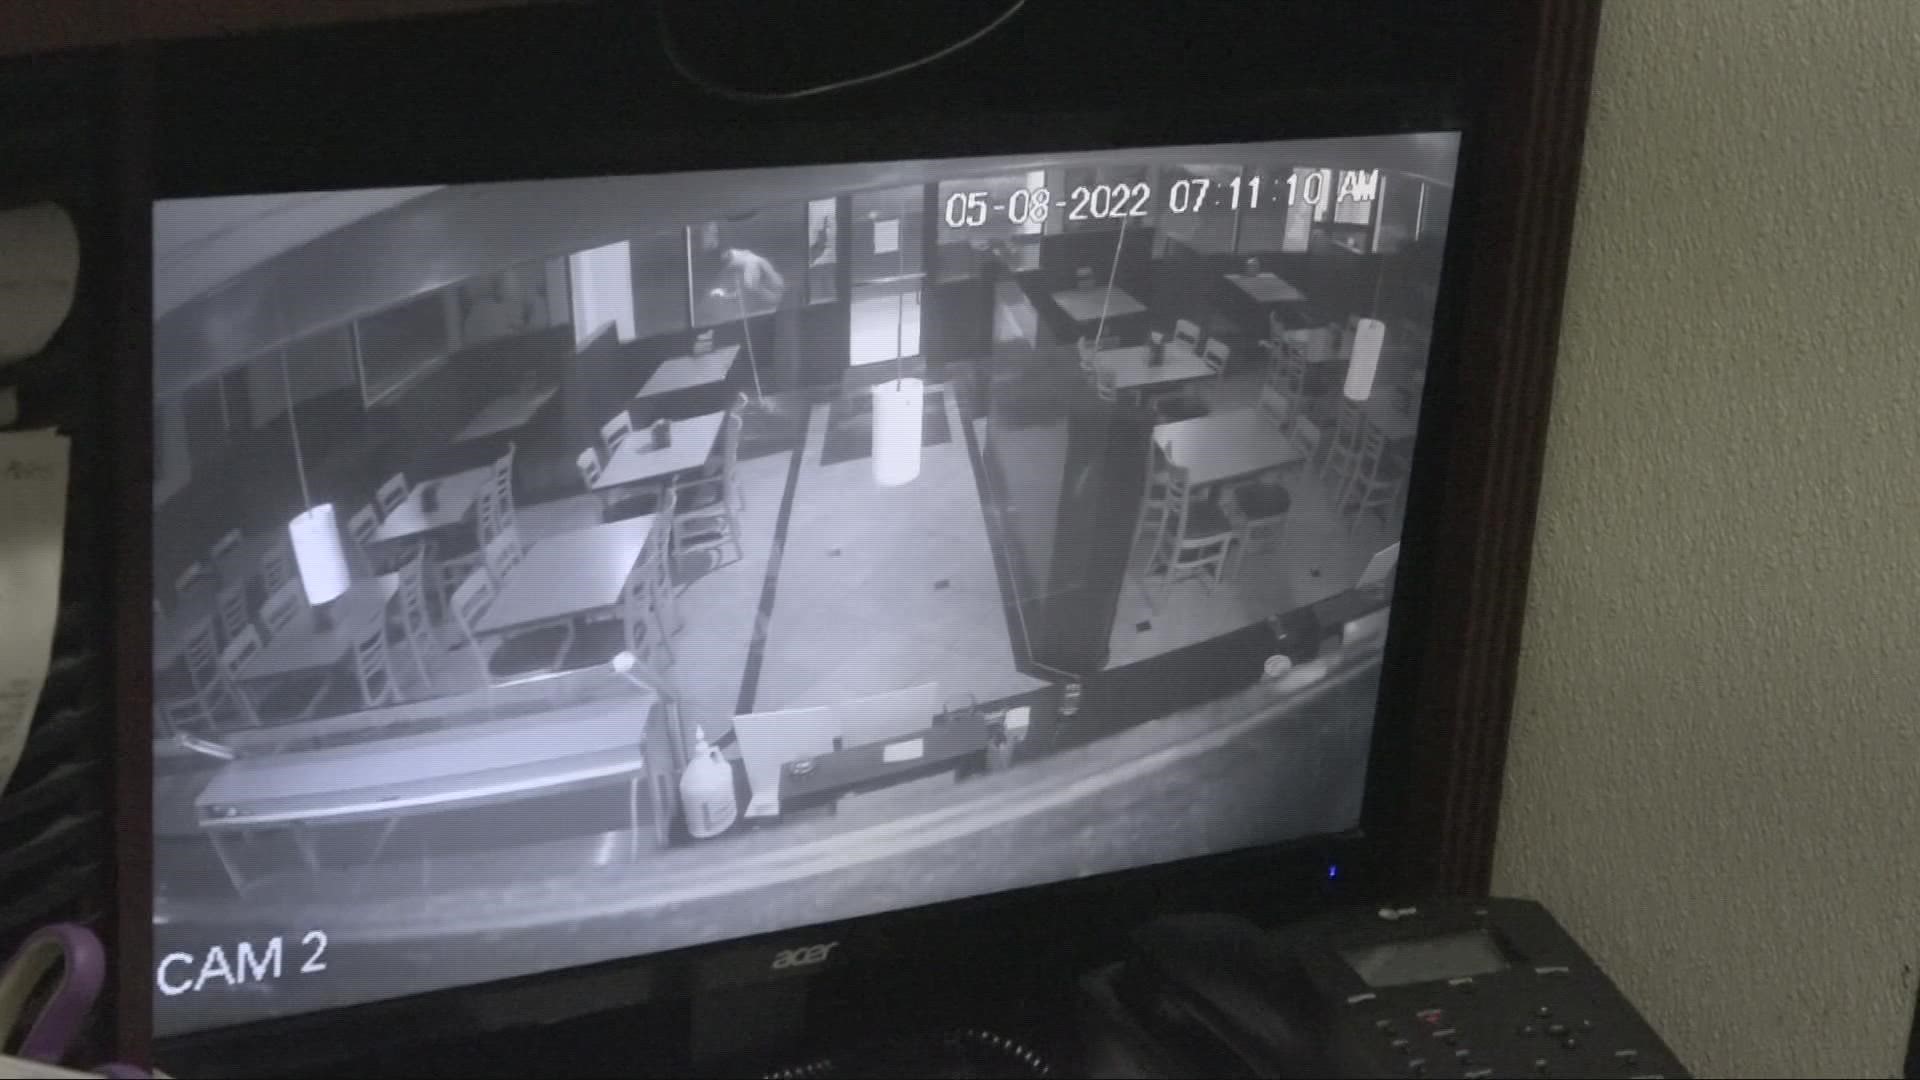 Surveillance footage from May 8 shows a person walking in front of the restaurant, smashing nearly every window at Citrus Heights Mountain Mike's.